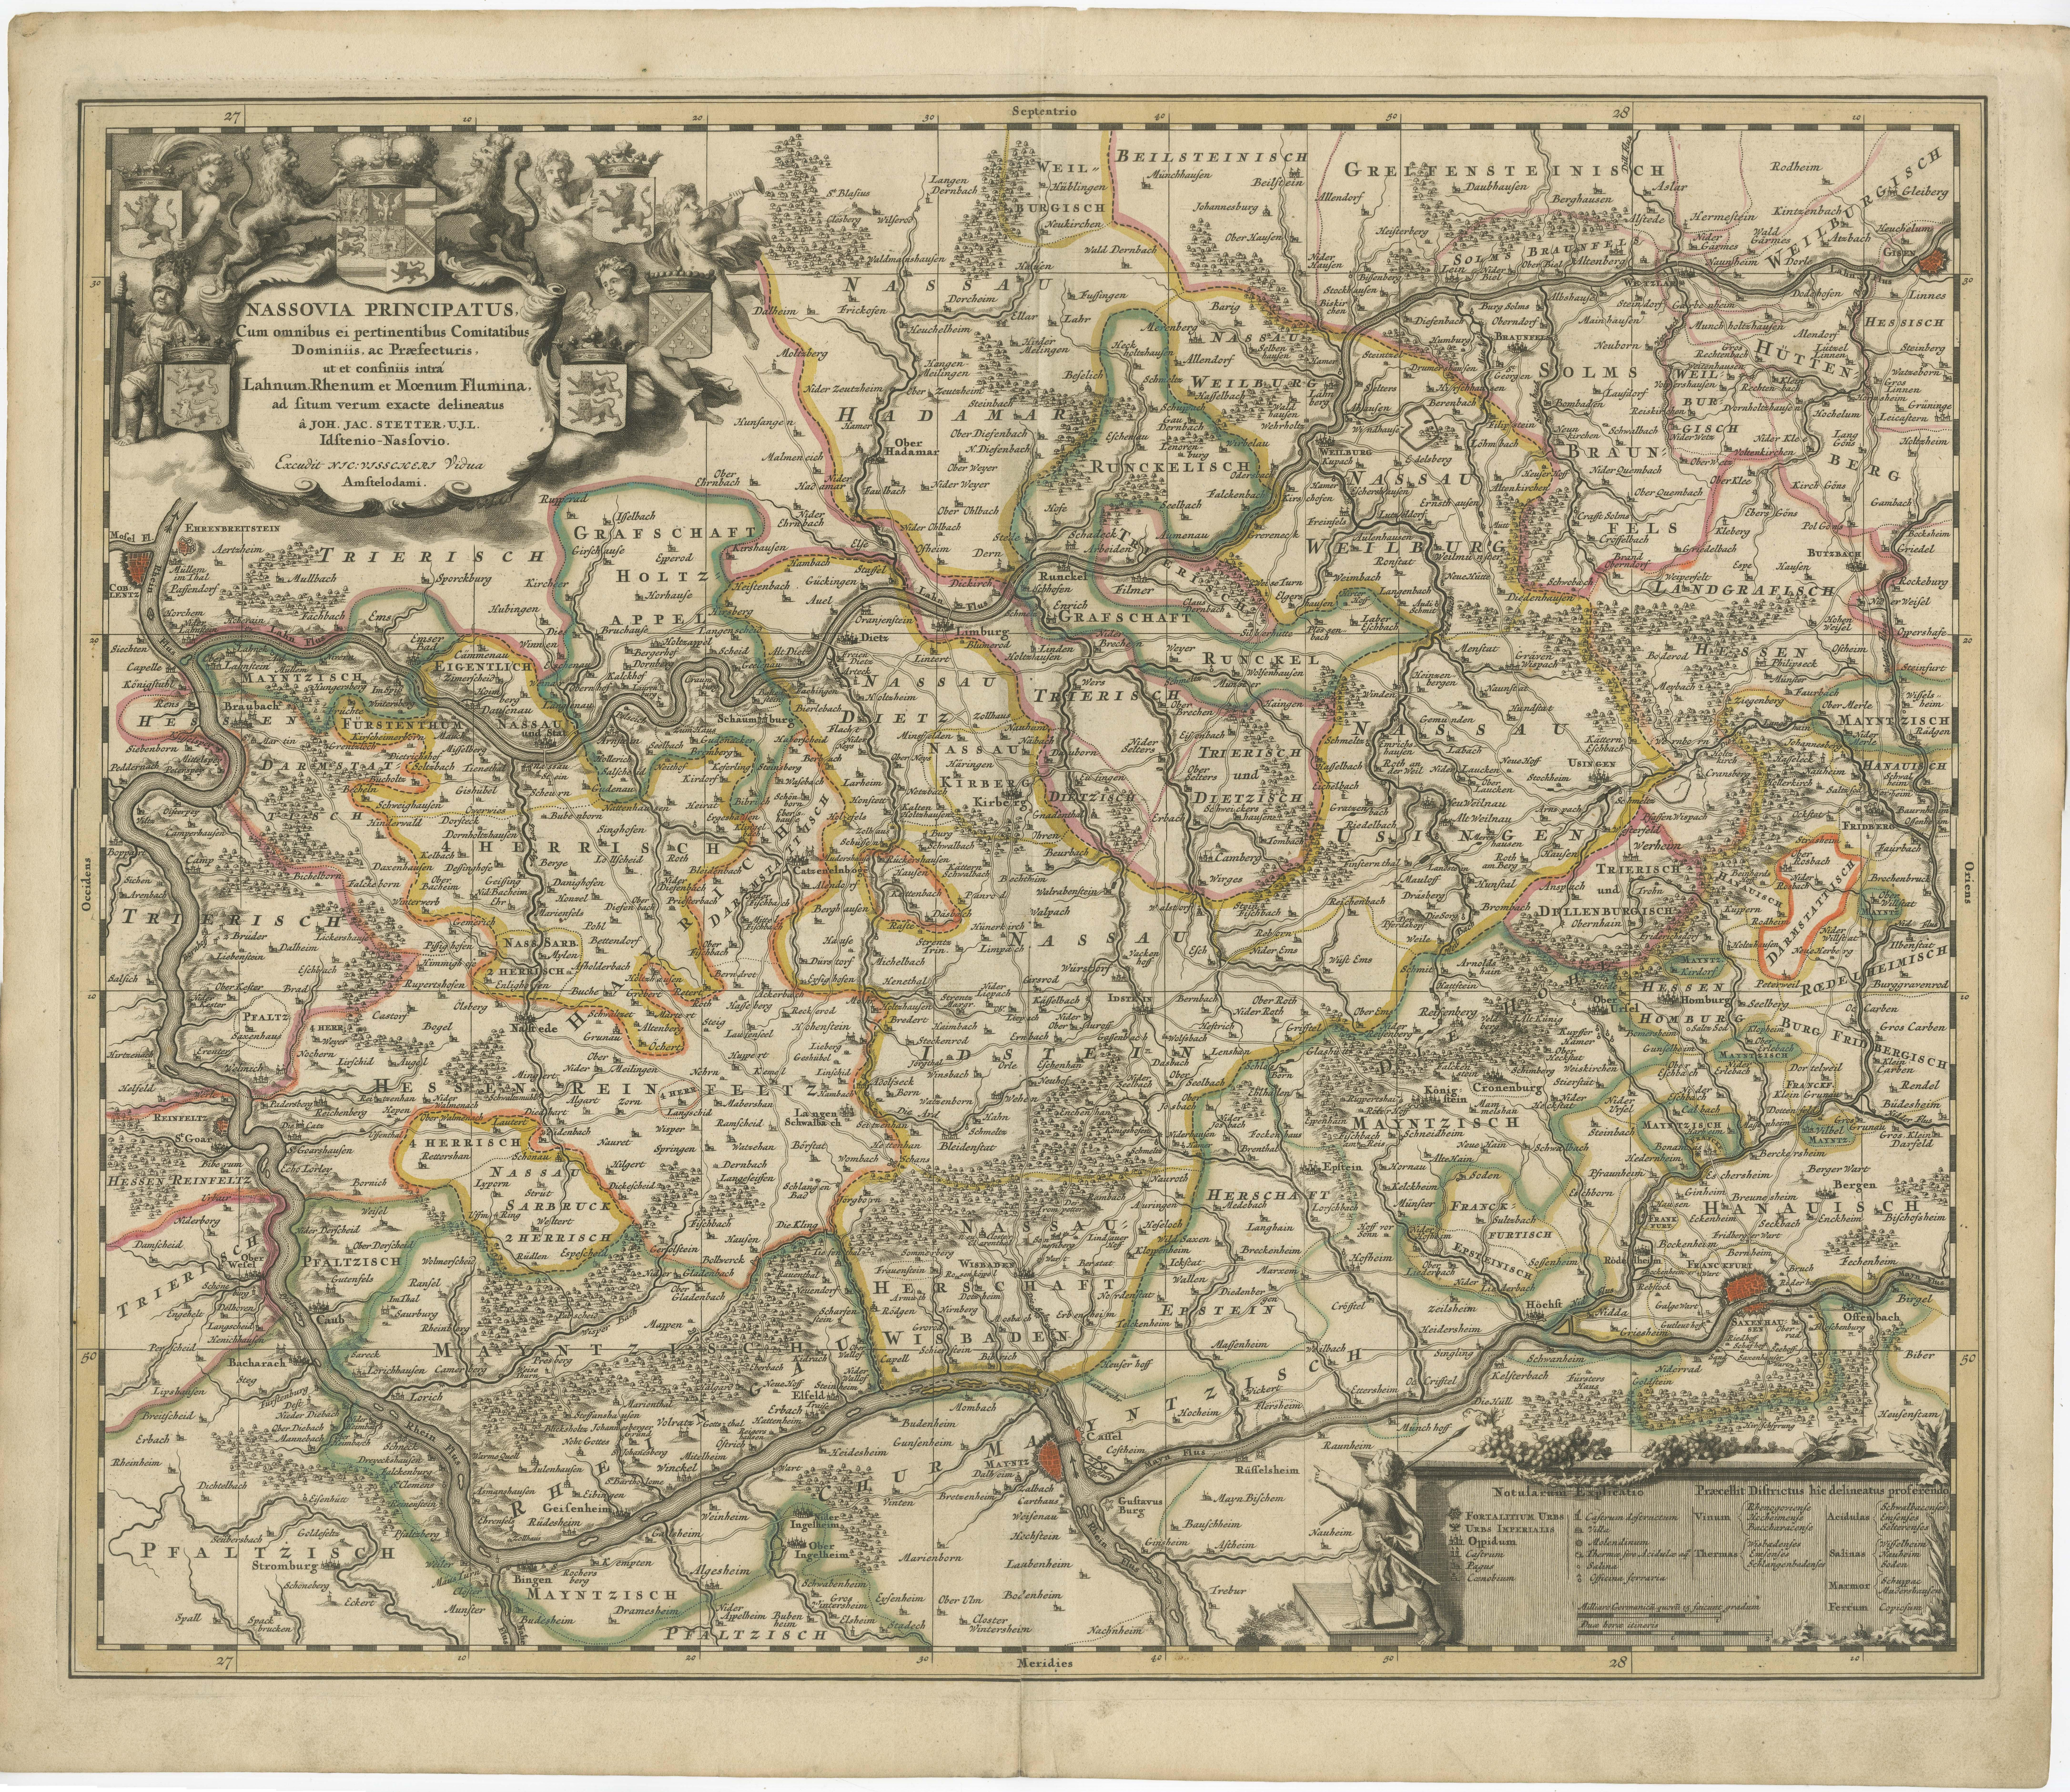 Antique map titled 'Nassovia Principatus (..)'. Detailed map of the Nassau region in western Germany between Koblenz, Hadamar, Giessen, Frankfurt and Mainz. The map is filled with information of roads, fortification, forests, castles, hot springs,